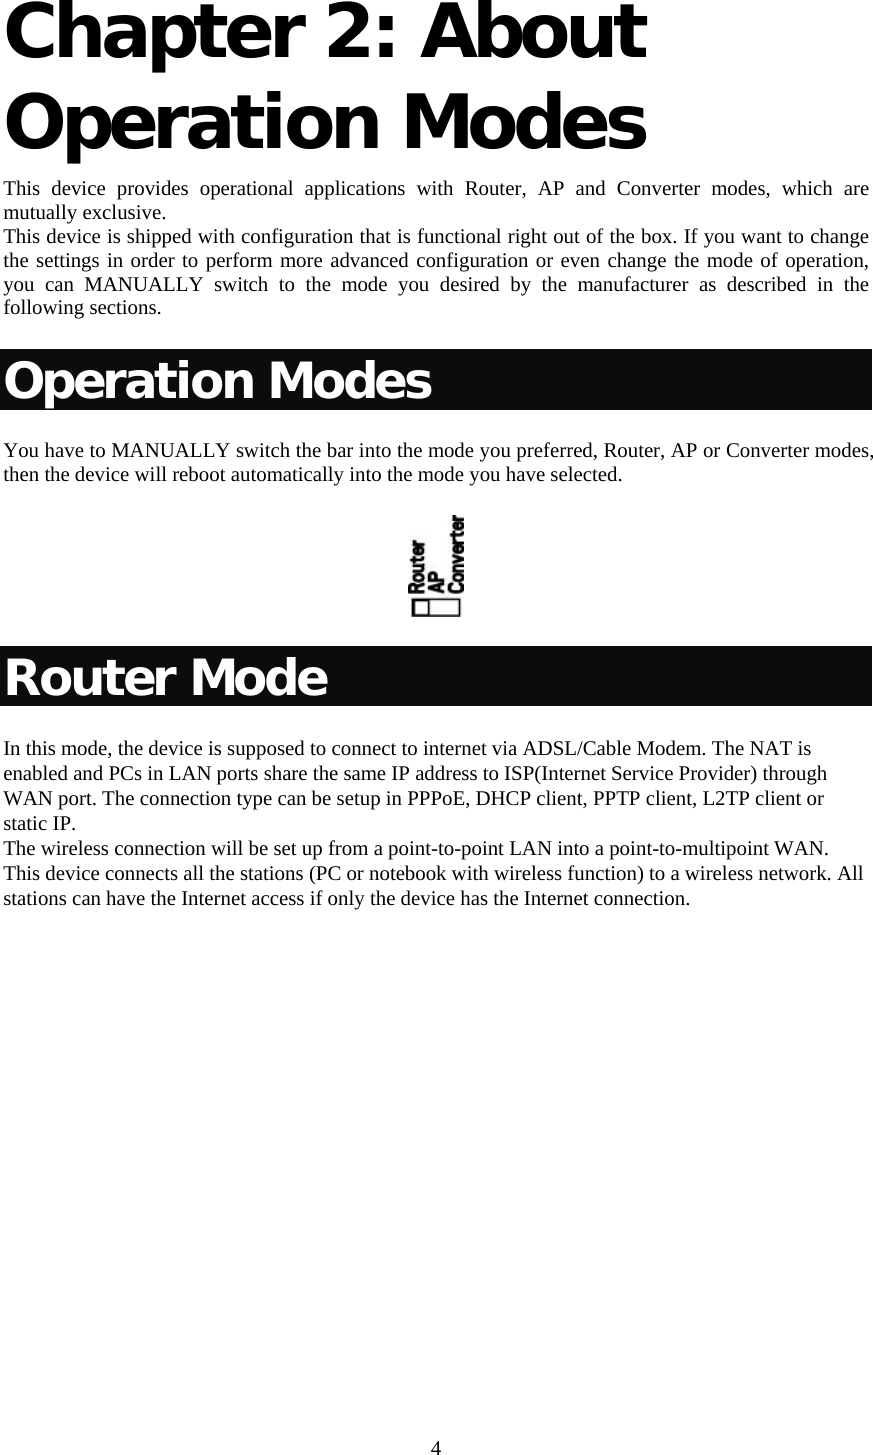     4 Chapter 2: About Operation Modes  This device provides operational applications with Router, AP and Converter modes, which are mutually exclusive.  This device is shipped with configuration that is functional right out of the box. If you want to change the settings in order to perform more advanced configuration or even change the mode of operation, you can MANUALLY switch to the mode you desired by the manufacturer as described in the following sections. Operation Modes You have to MANUALLY switch the bar into the mode you preferred, Router, AP or Converter modes, then the device will reboot automatically into the mode you have selected.   Router Mode In this mode, the device is supposed to connect to internet via ADSL/Cable Modem. The NAT is enabled and PCs in LAN ports share the same IP address to ISP(Internet Service Provider) through WAN port. The connection type can be setup in PPPoE, DHCP client, PPTP client, L2TP client or static IP.  The wireless connection will be set up from a point-to-point LAN into a point-to-multipoint WAN. This device connects all the stations (PC or notebook with wireless function) to a wireless network. All stations can have the Internet access if only the device has the Internet connection. 